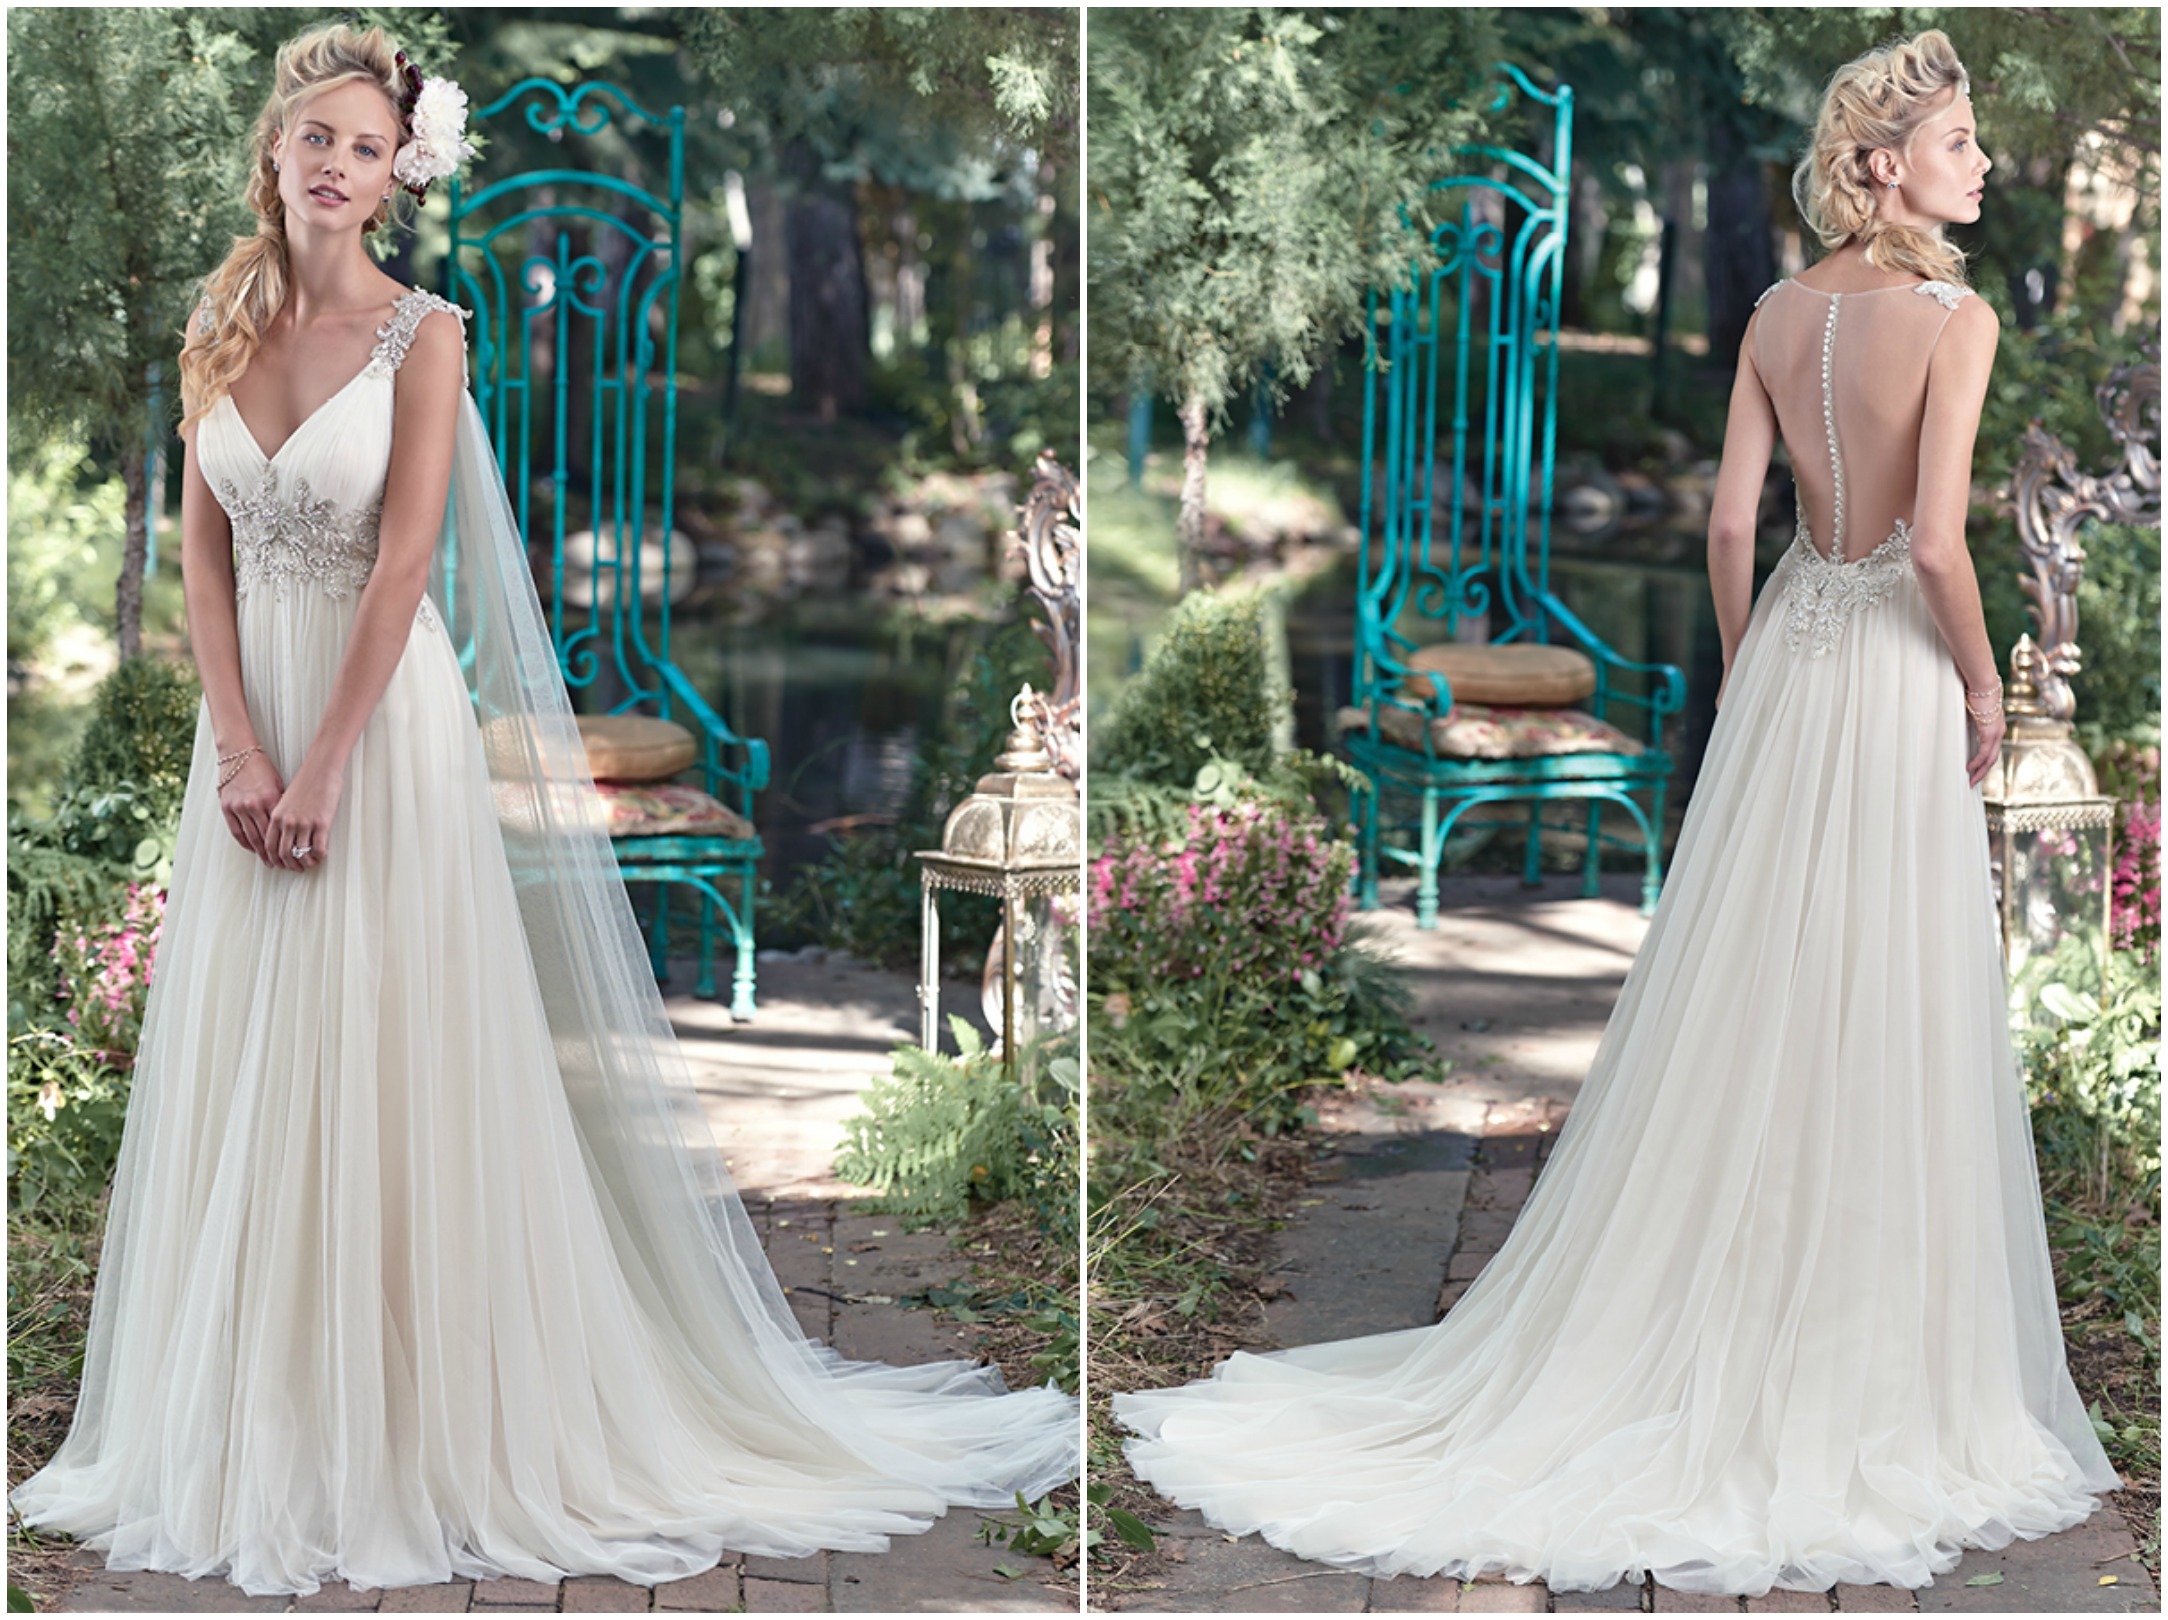 <a href="http://www.maggiesottero.com/maggie-sottero/kalisti/9542" target="_blank">Maggie Sottero Spring 2016</a>